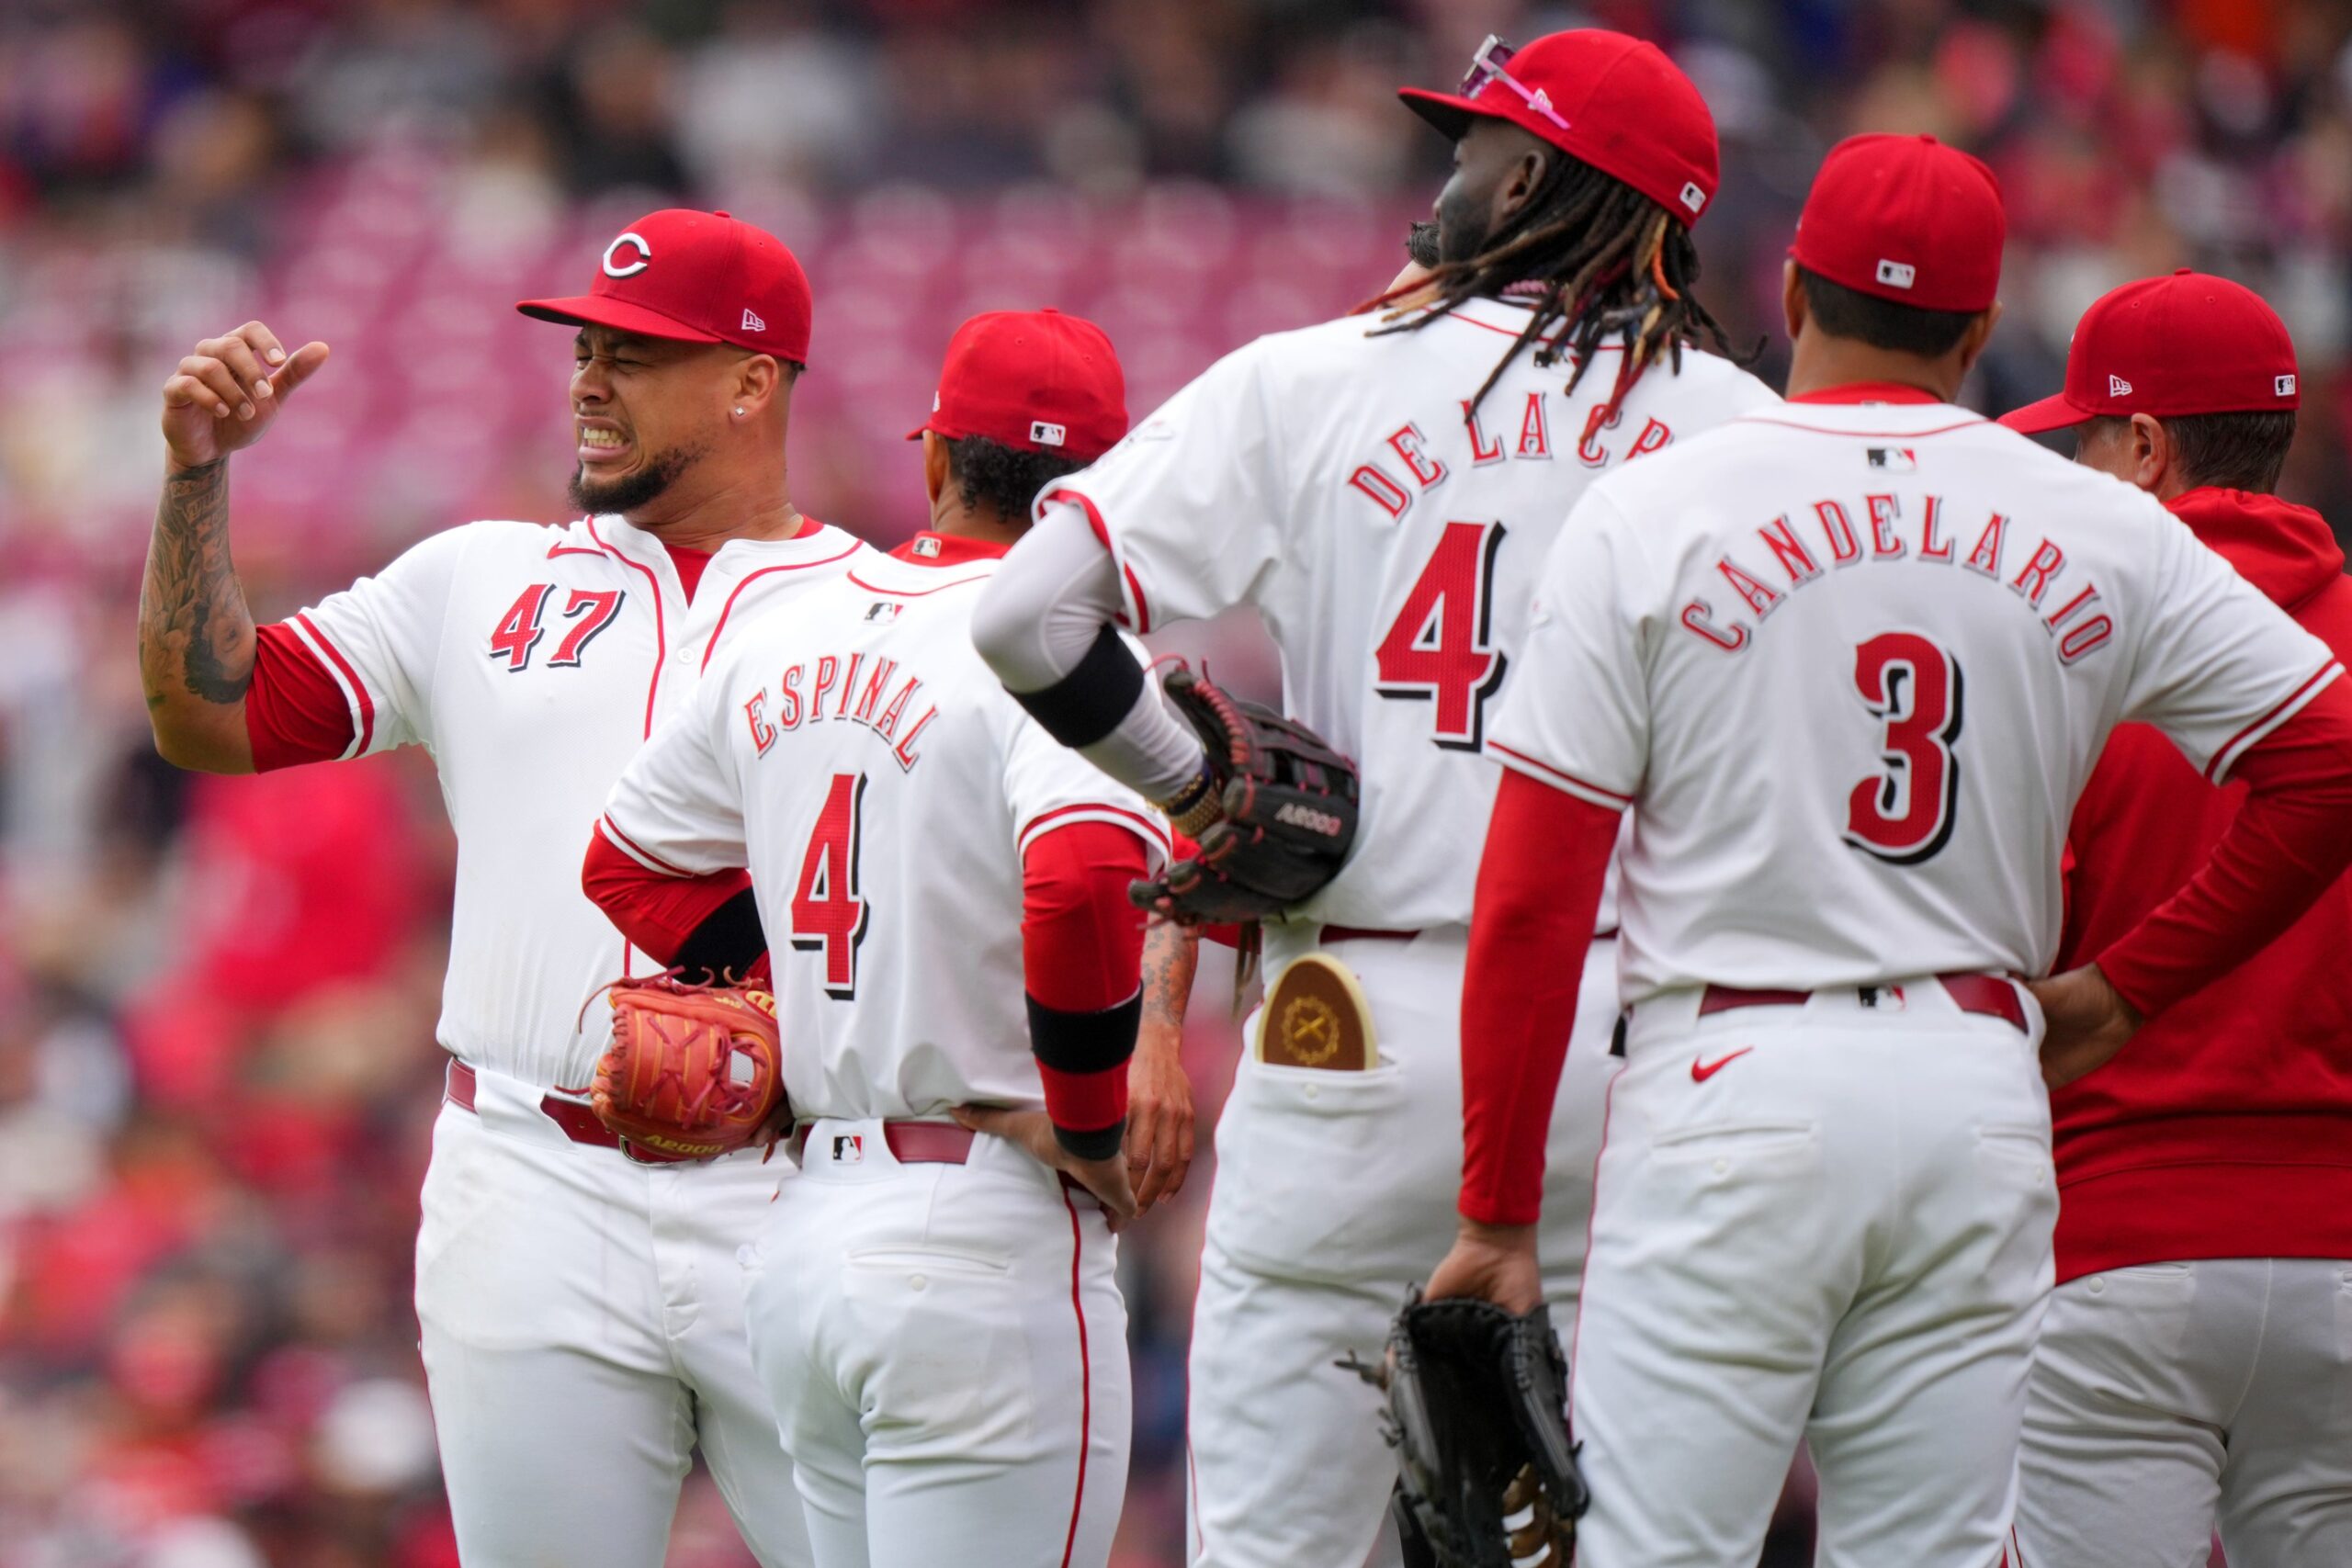 Reds Opening Day Starter Sidelined with Bruised Forearm